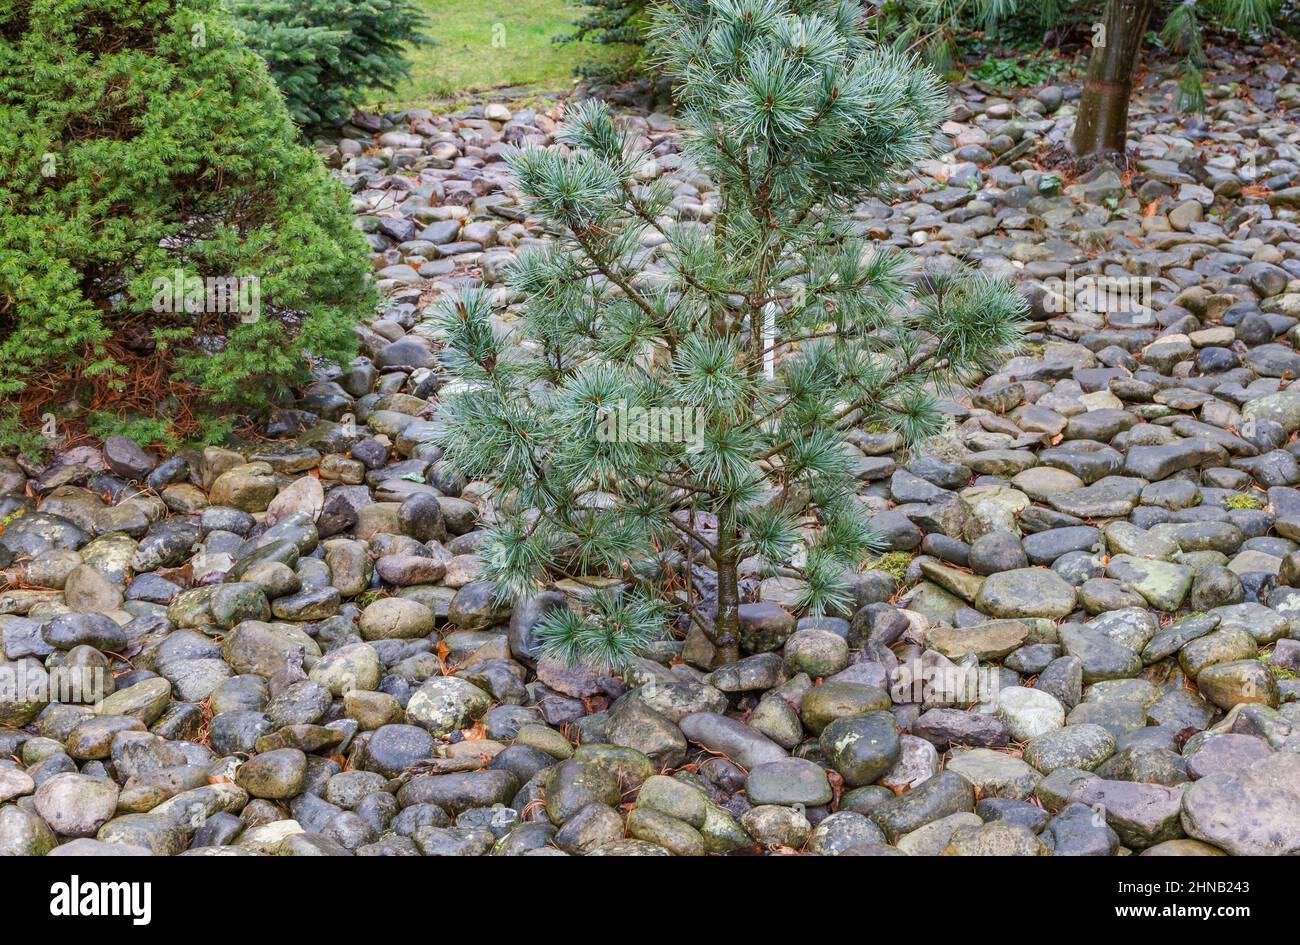 Conifers and pine trees planted in pebbles. Stock Photo